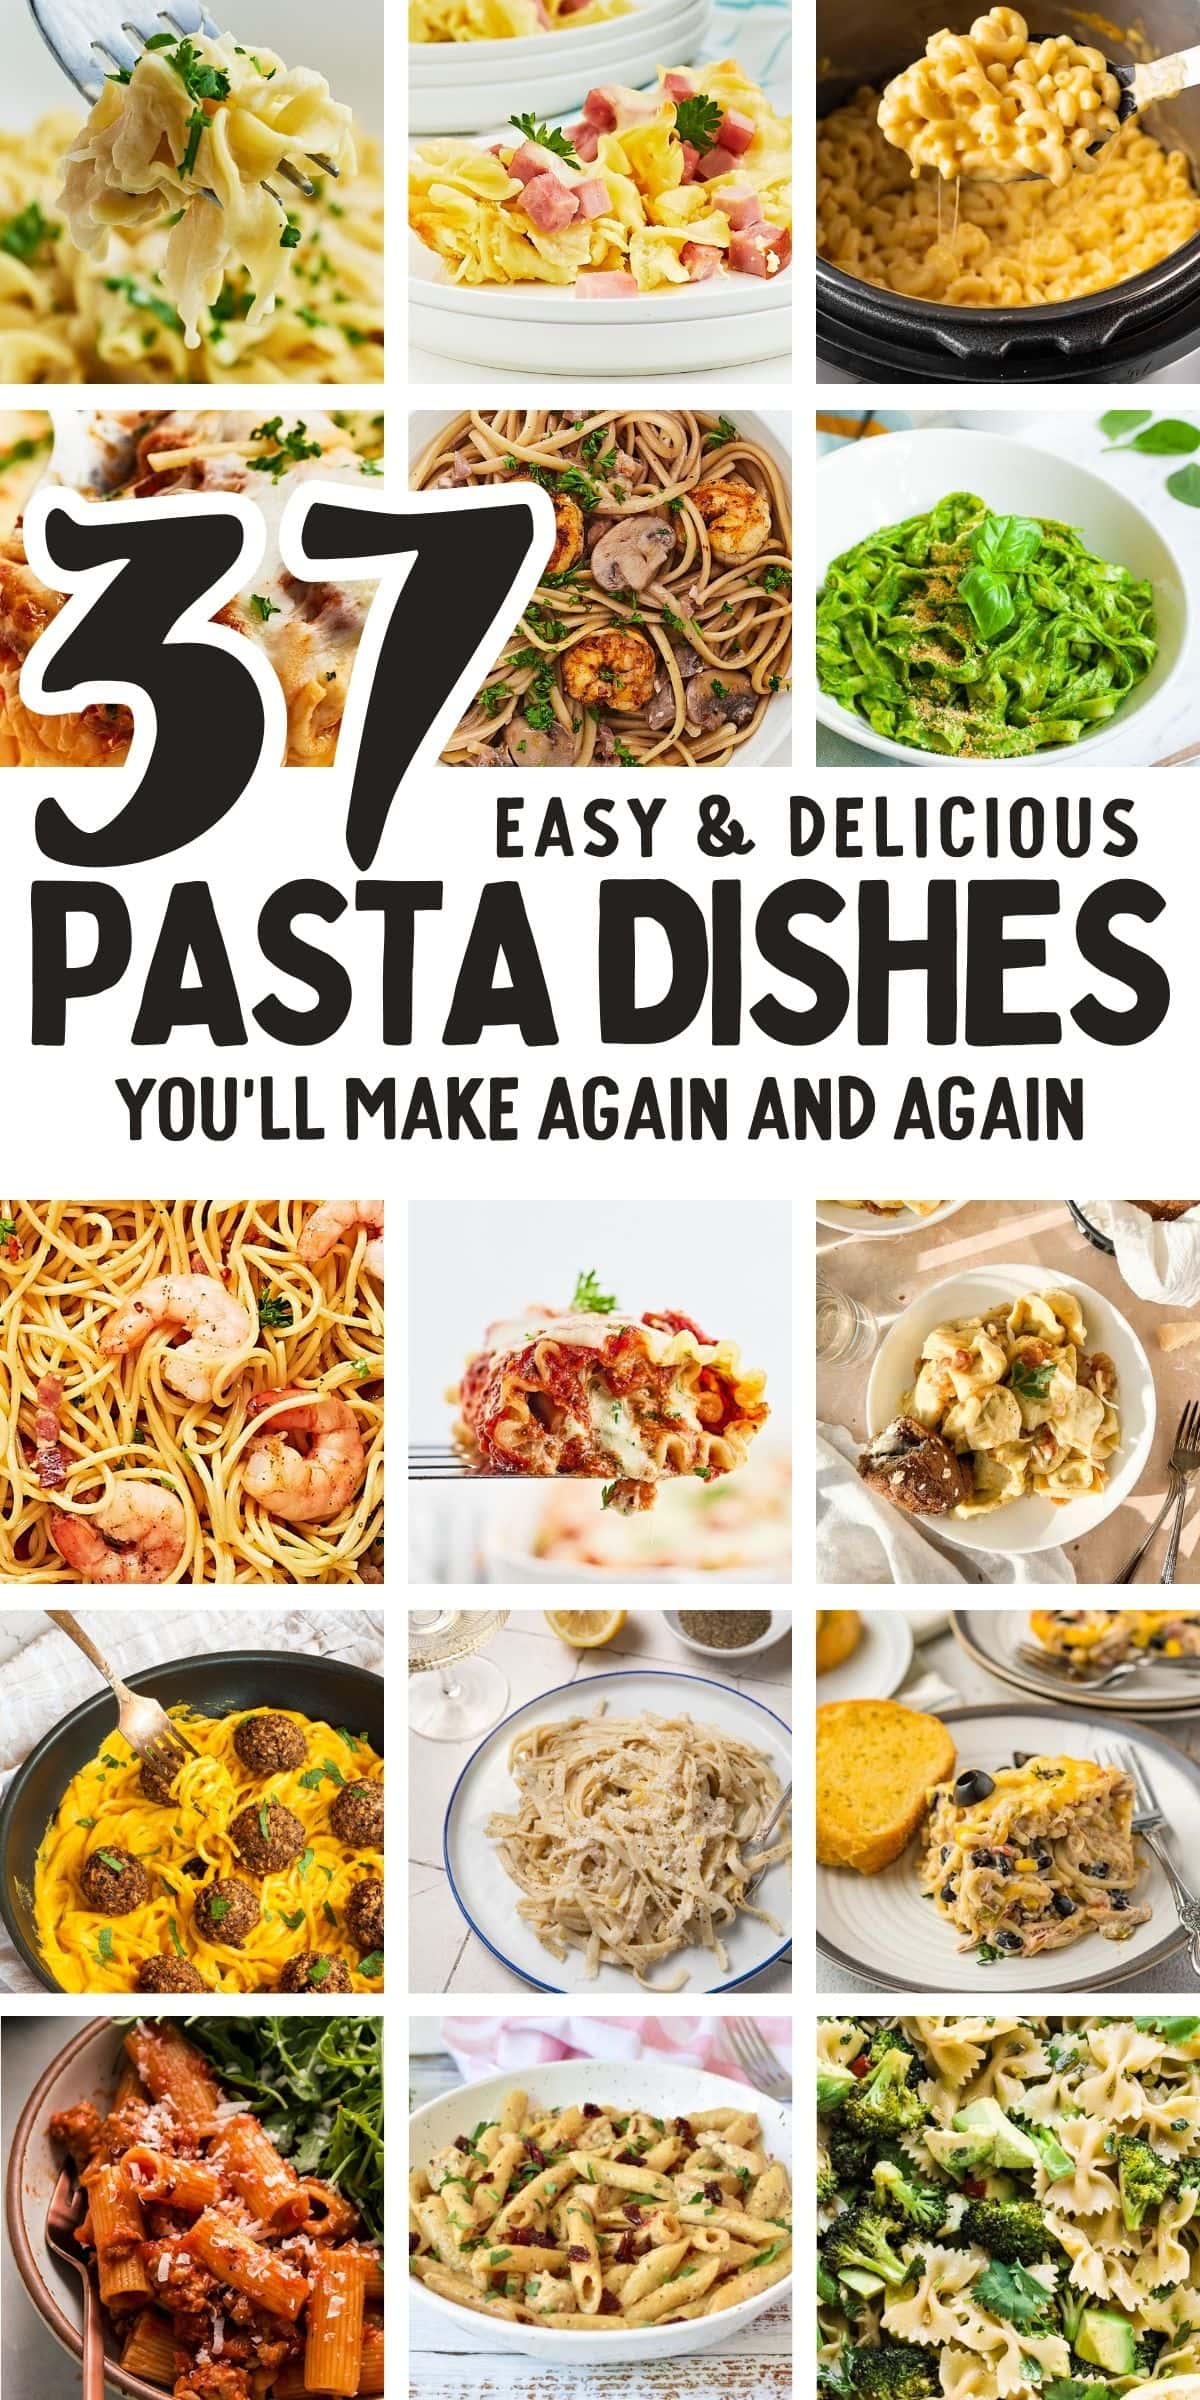 Looking to upgrade your dinner game without the fuss? Discover 37 easy and mouthwatering pasta dishes like Shrimp Carbonara and Chicken Parmesan that you can whip up with just 10 ingredients or less! Say goodbye to complicated recipes and hello to delicious meals that are a breeze to make. Perfect for busy weeknights or when you just want something yummy and quick! #cheerfulcook #easypastarecipes #10IngredientsOrLess #DinnerIdeas #pasta #easyrecipes♡ cheerfulcook.com via @cheerfulcook